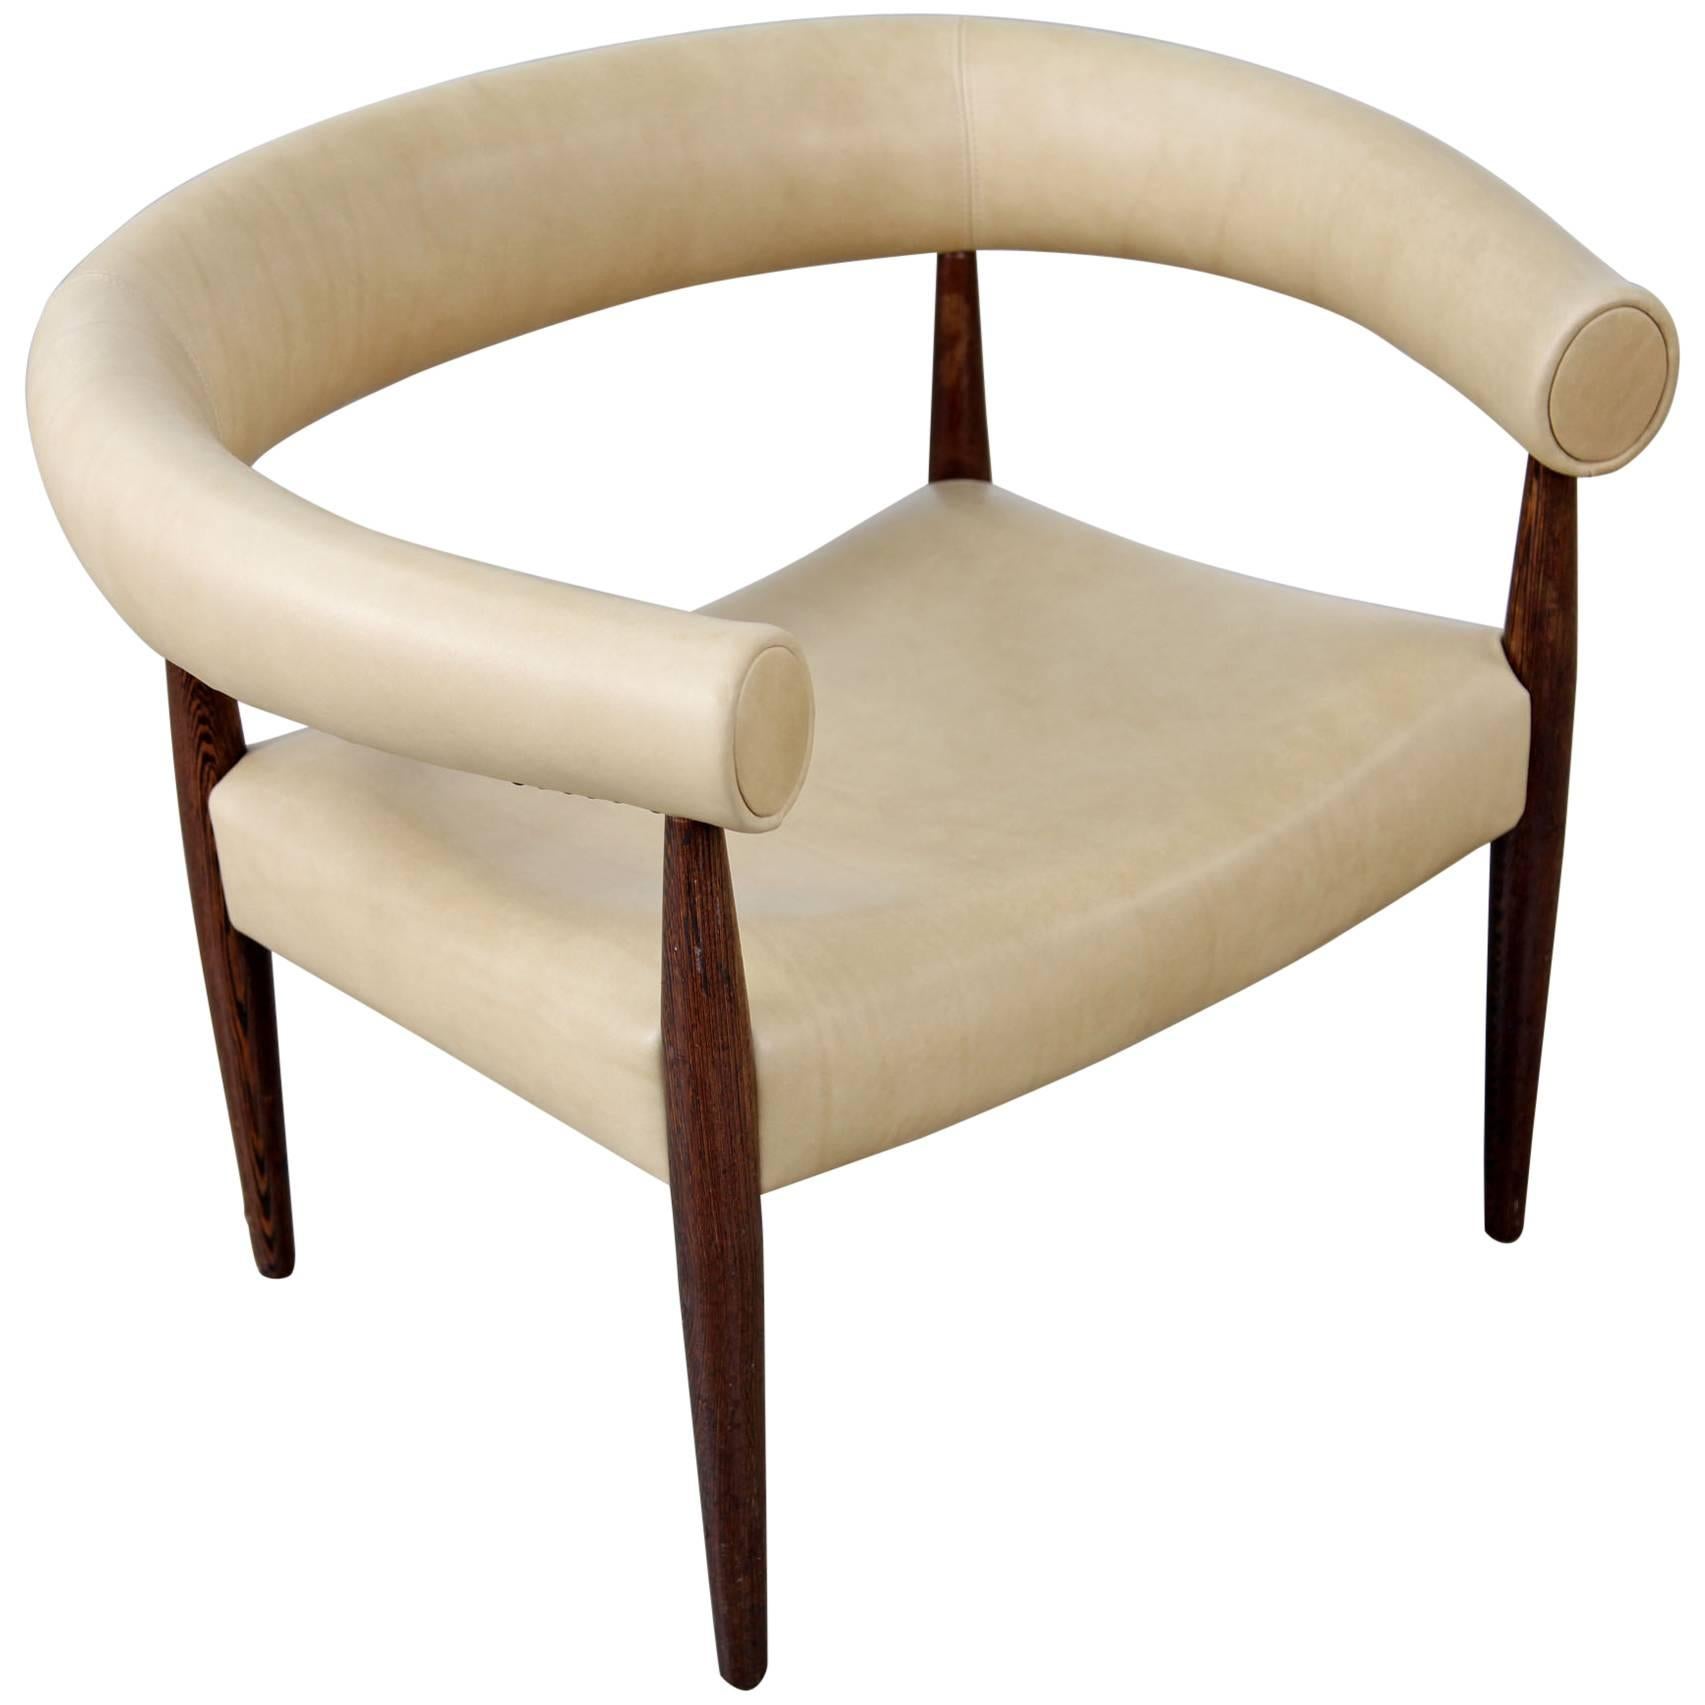 Nanna Ditzel "Ring" Easy Chair with Aniline Leather